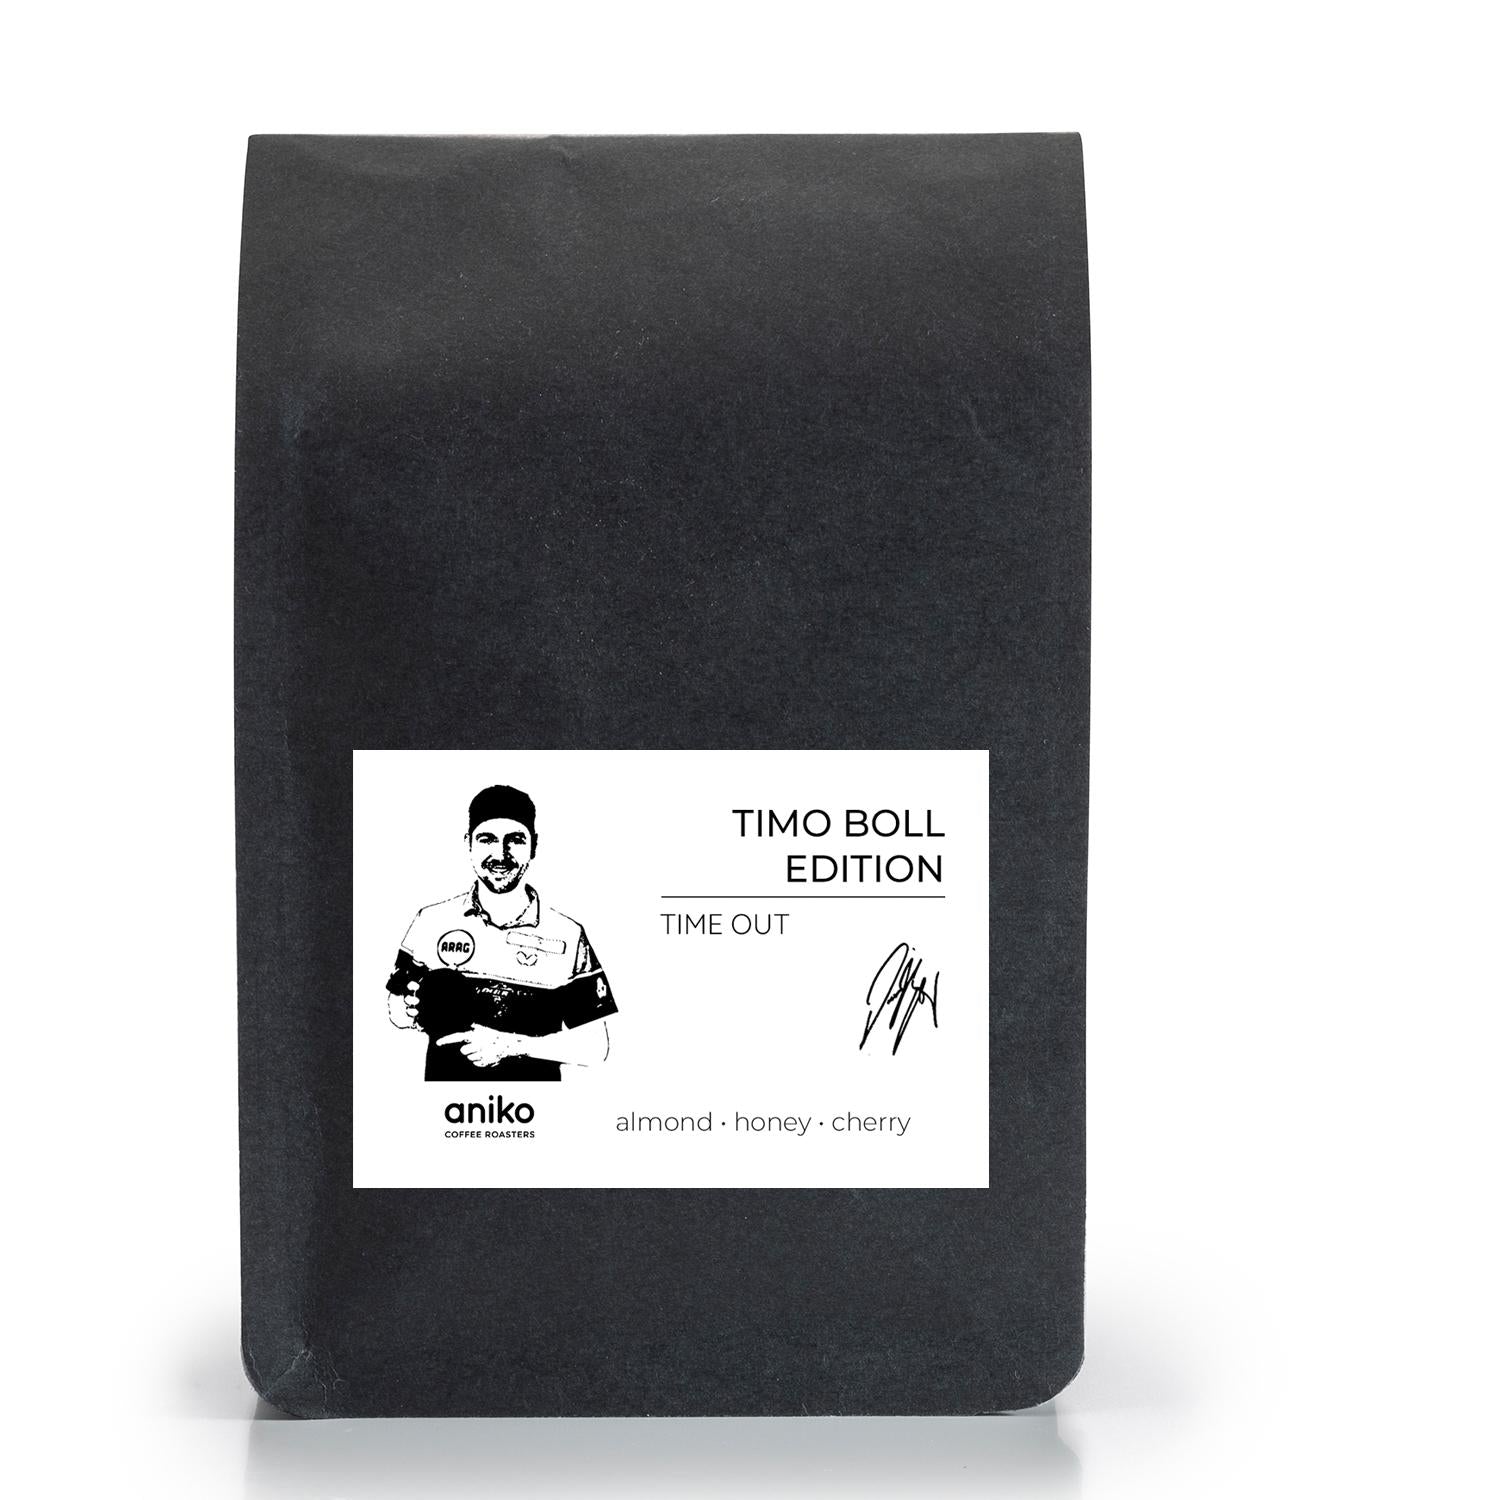 Timo Boll Edition I Time Out commercial aniko Coffee Roasters 